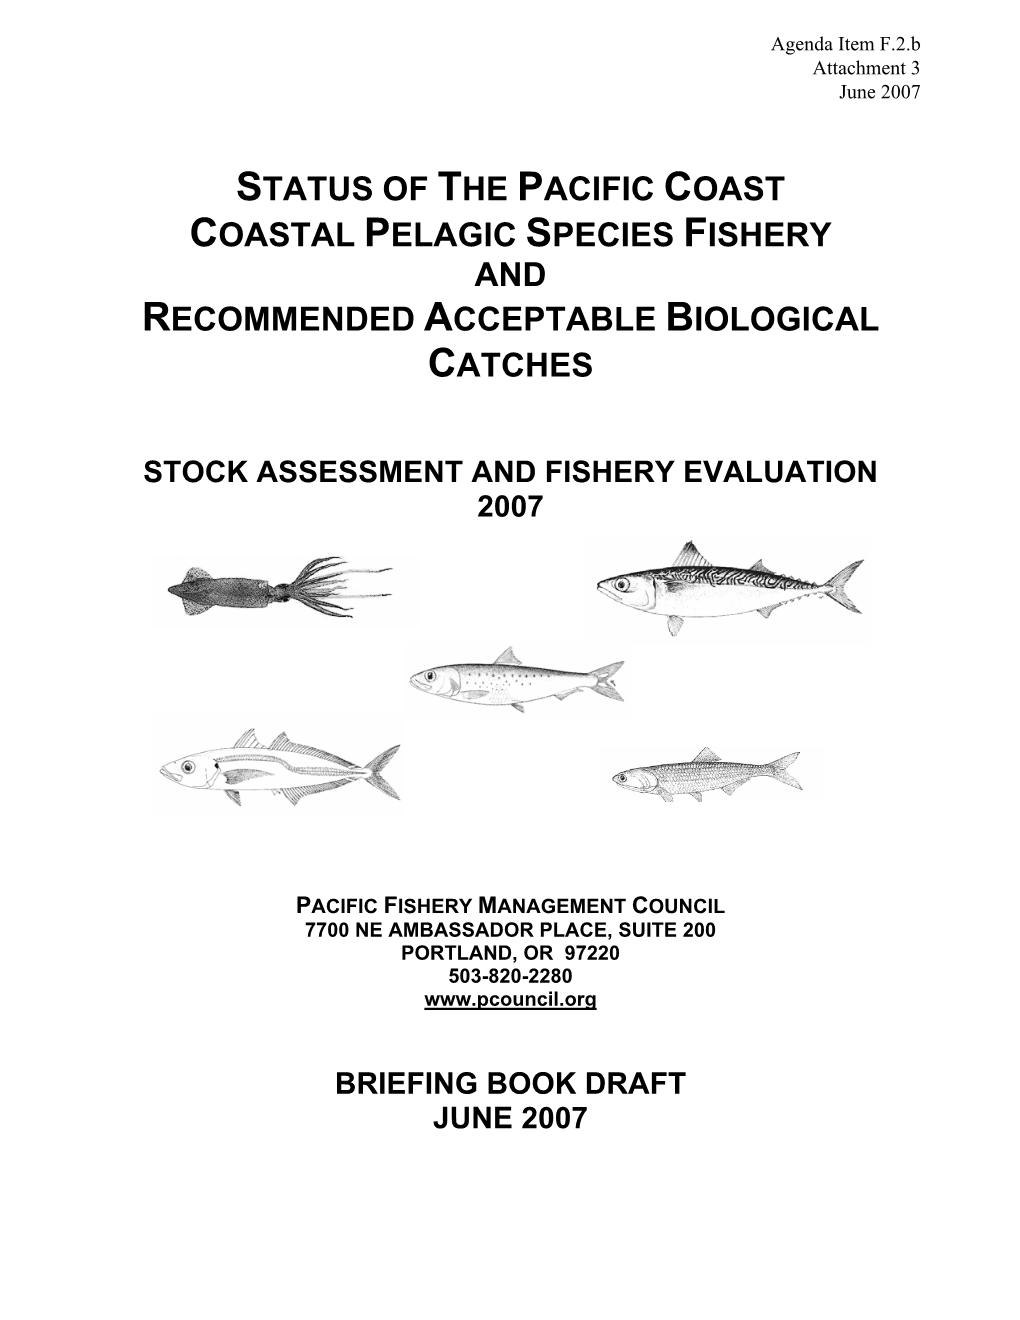 Status of the Pacific Coast Coastal Pelagic Species Fishery and Recommended Acceptable Biological Catches